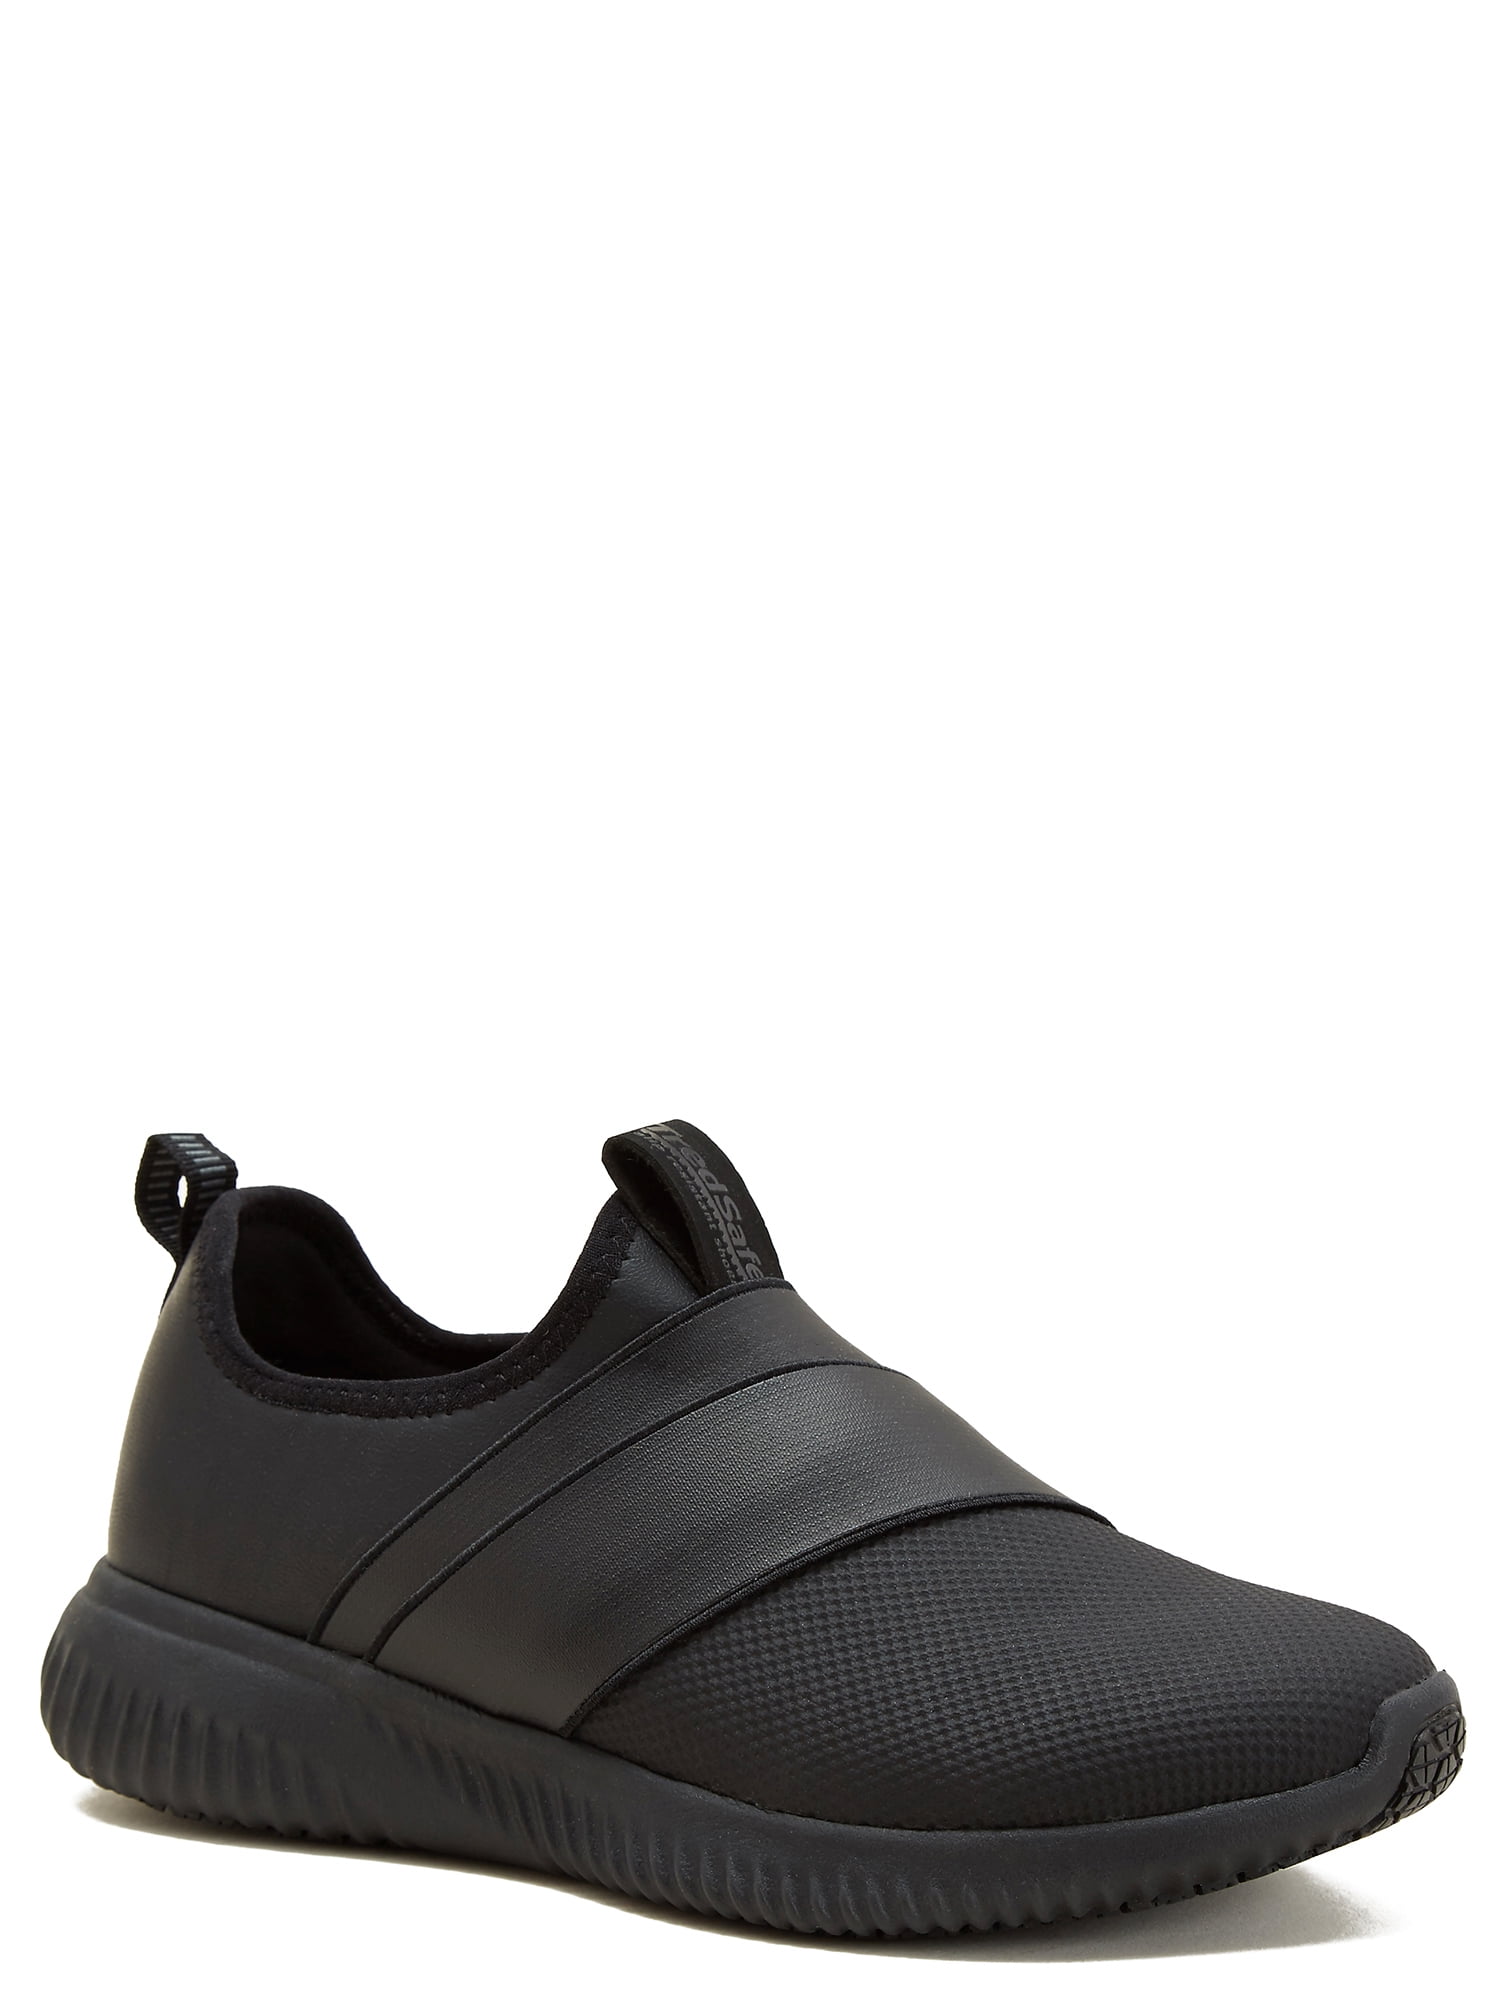 black leather slip on tennis shoes